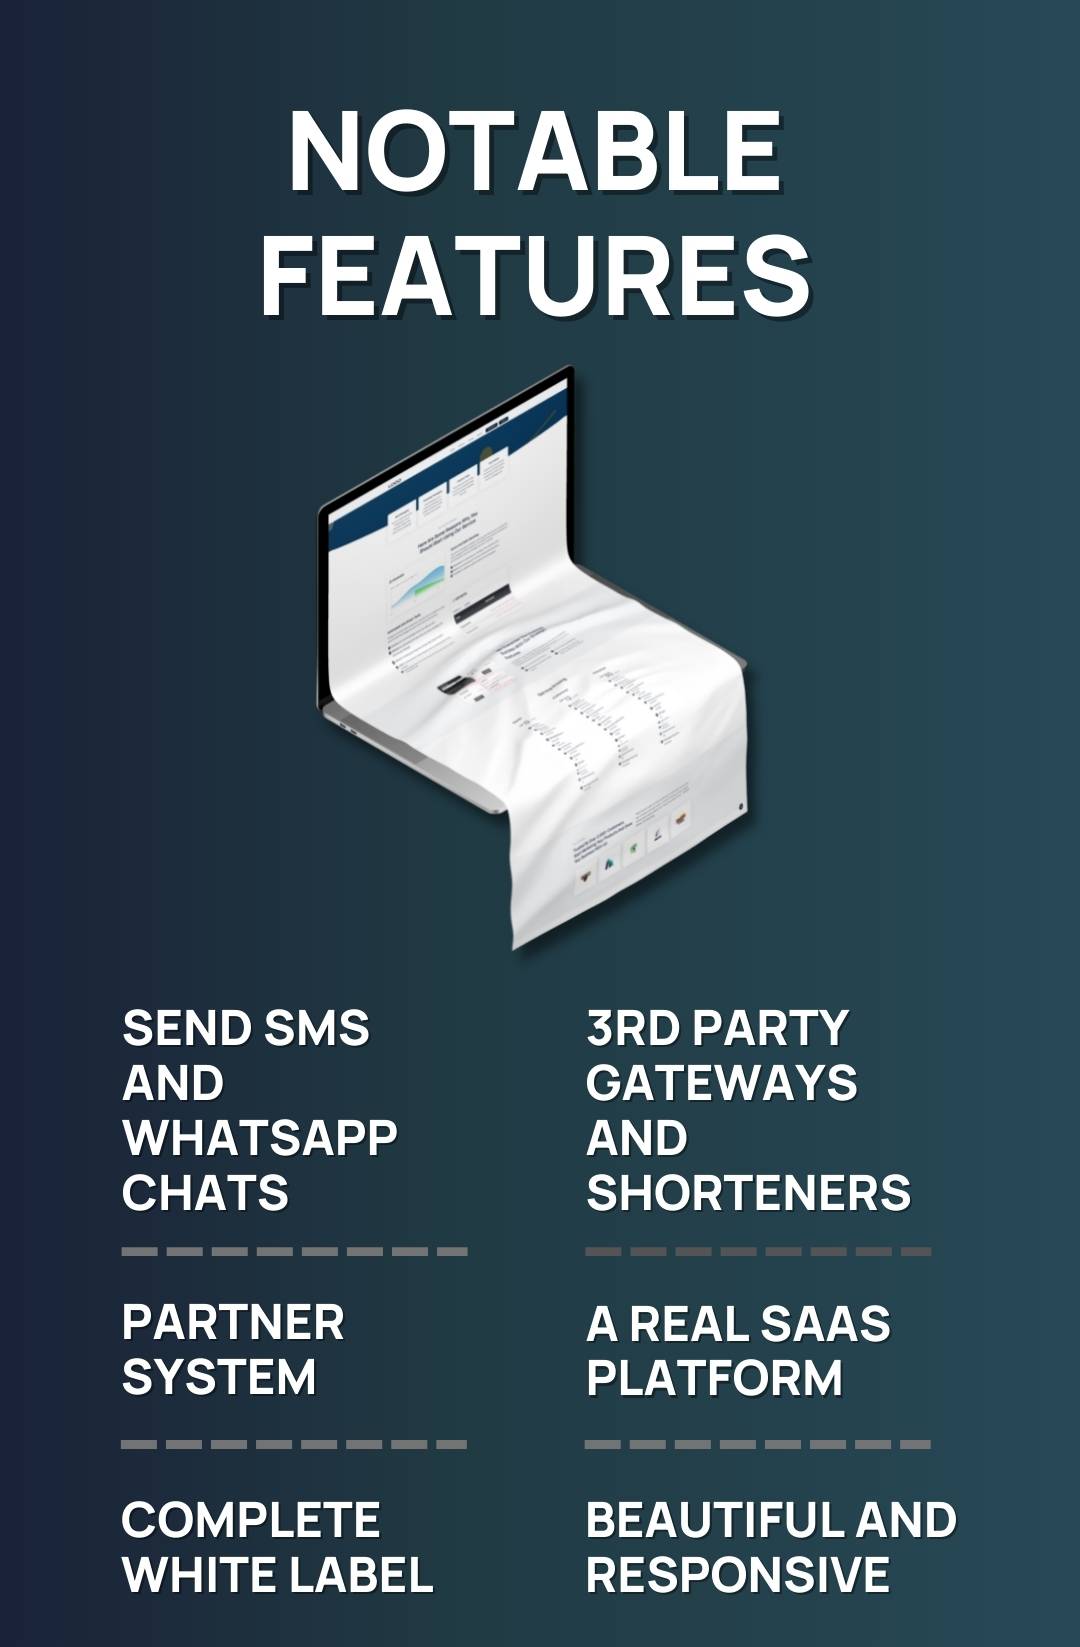 Zender - Messaging Platform for SMS, WhatsApp & use Android Devices as SMS Gateways (SaaS) - 6